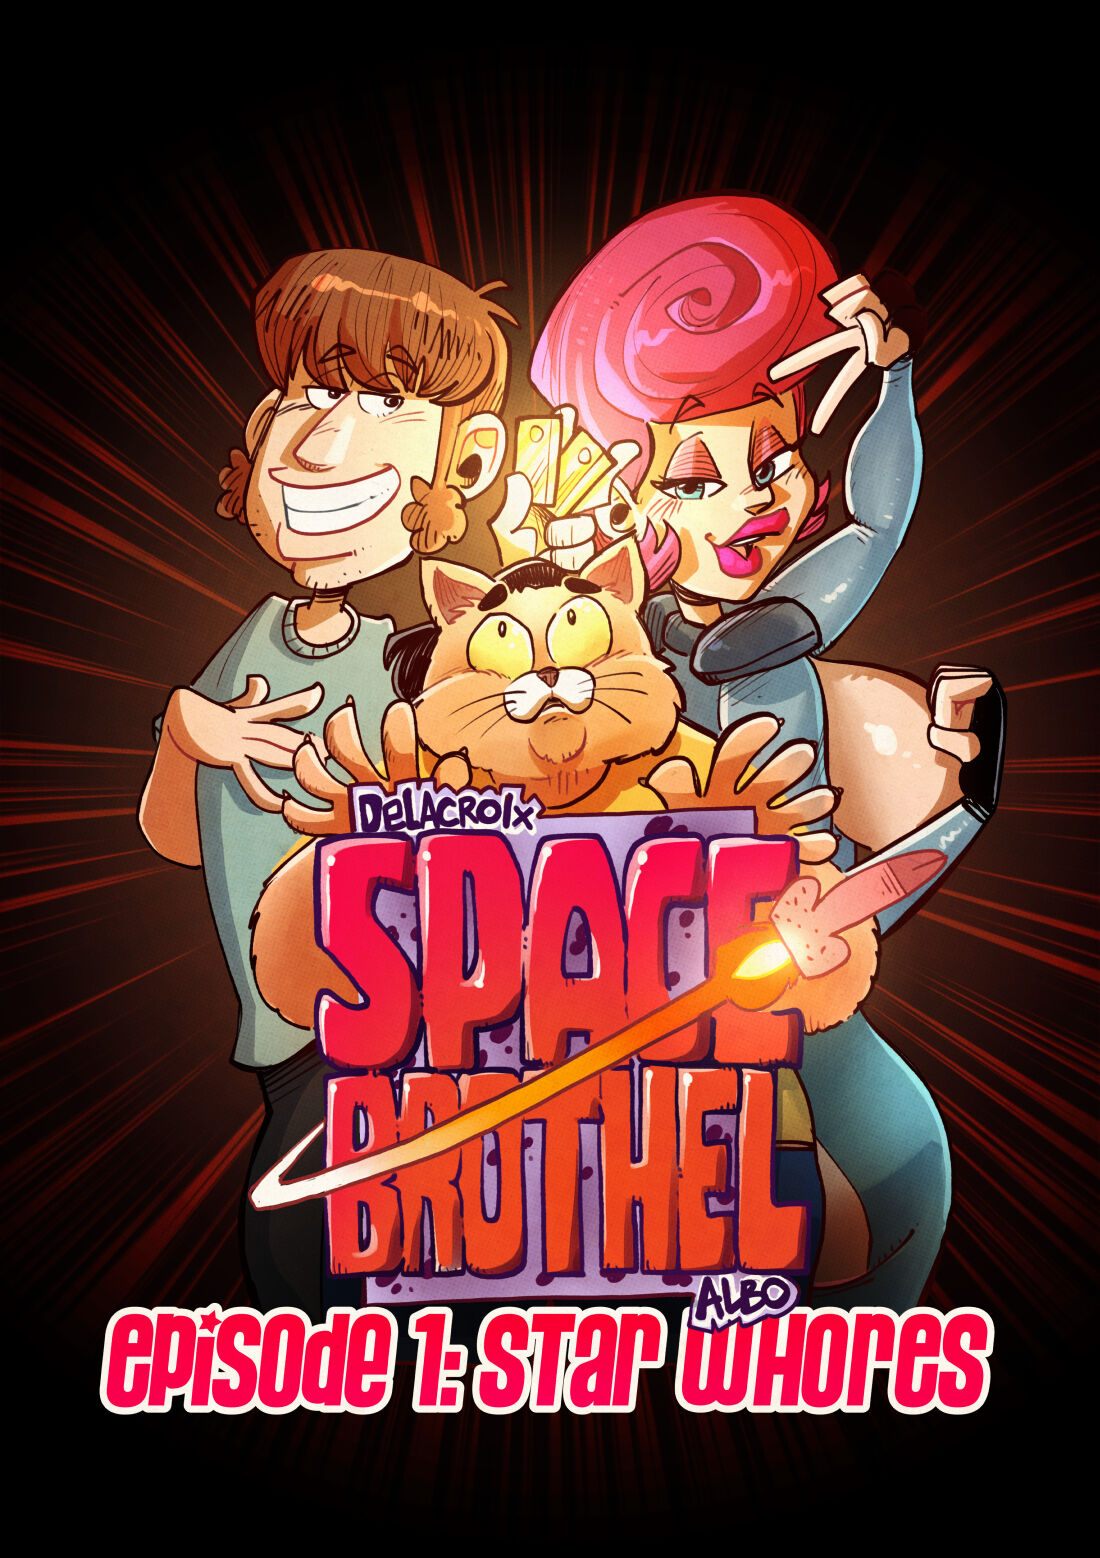 Space Brothel – Episode 1 by Albo